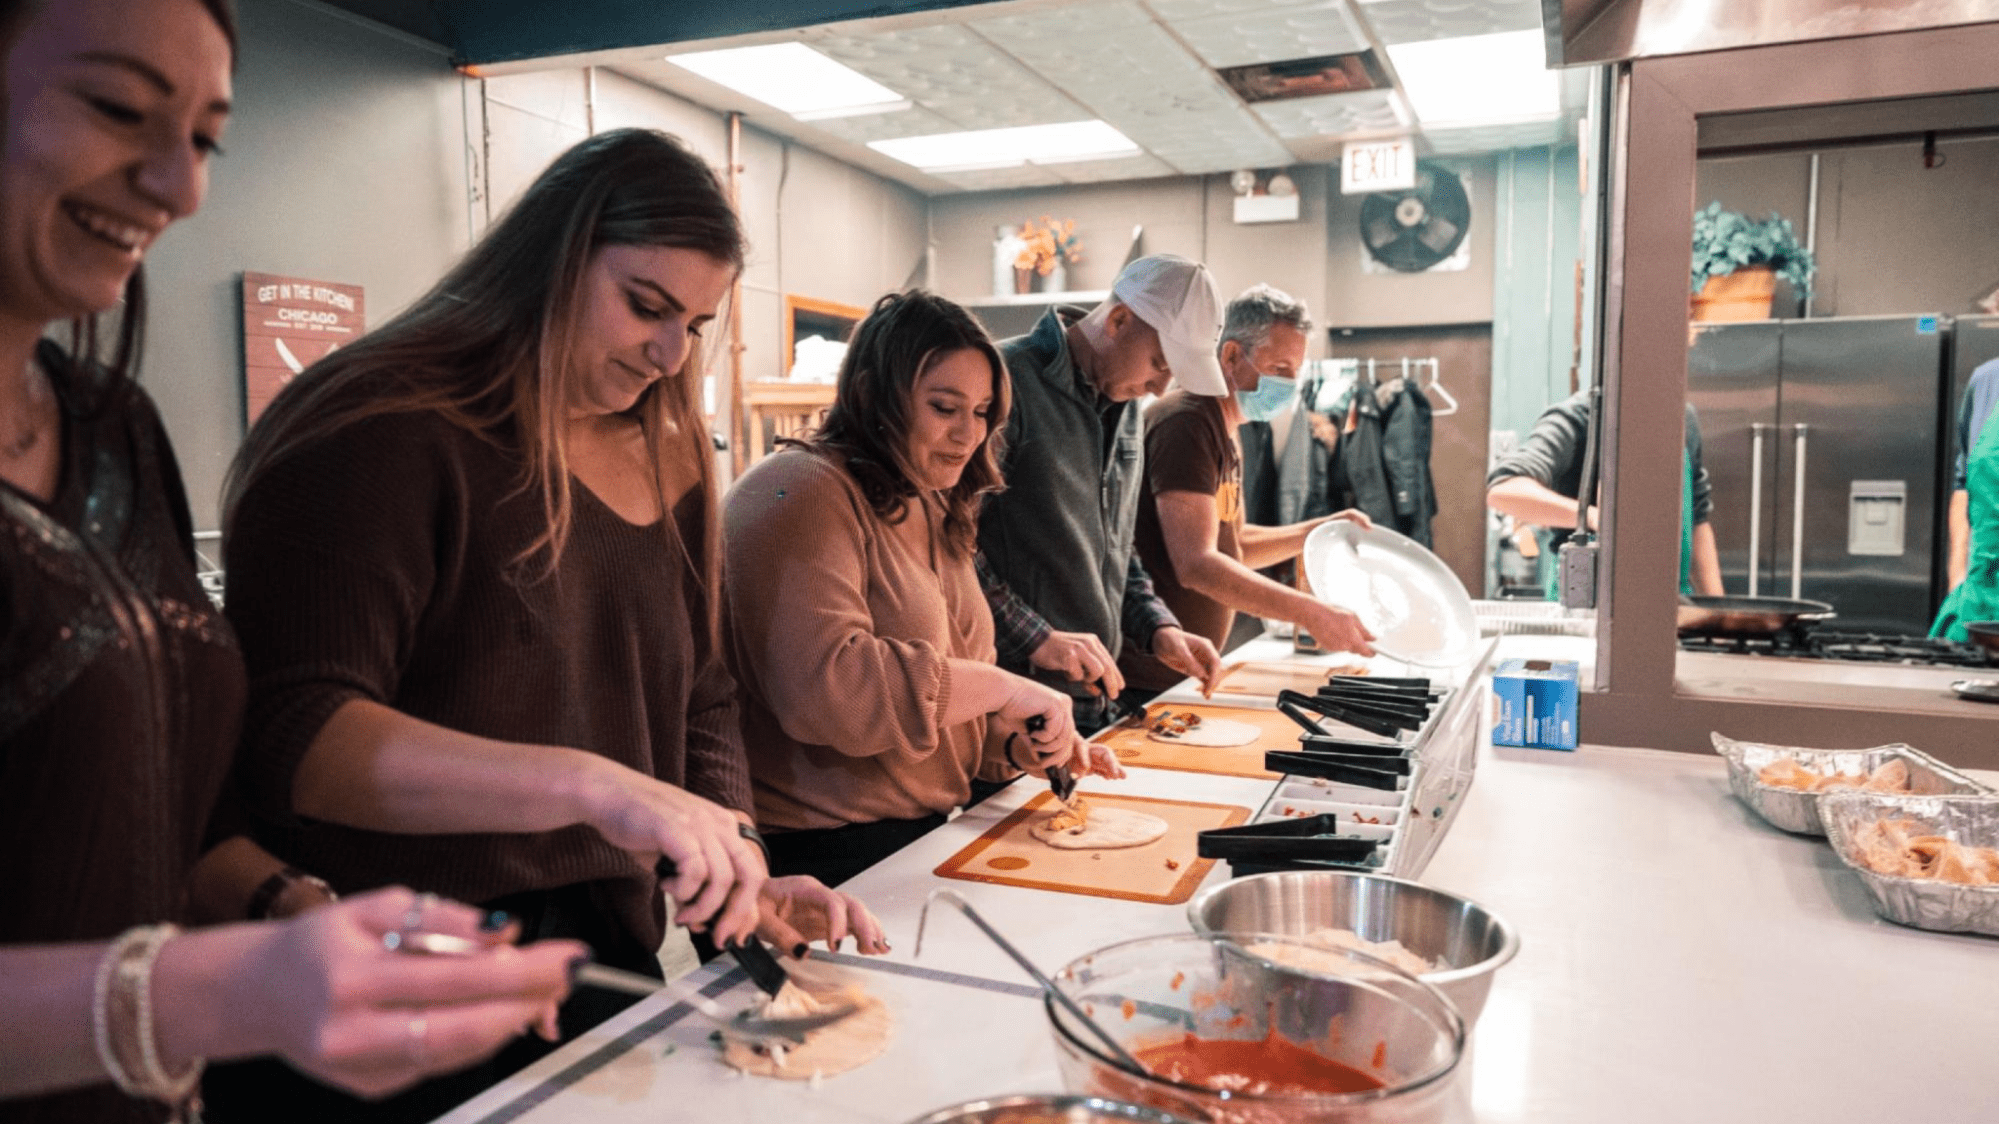 People cooking at an event